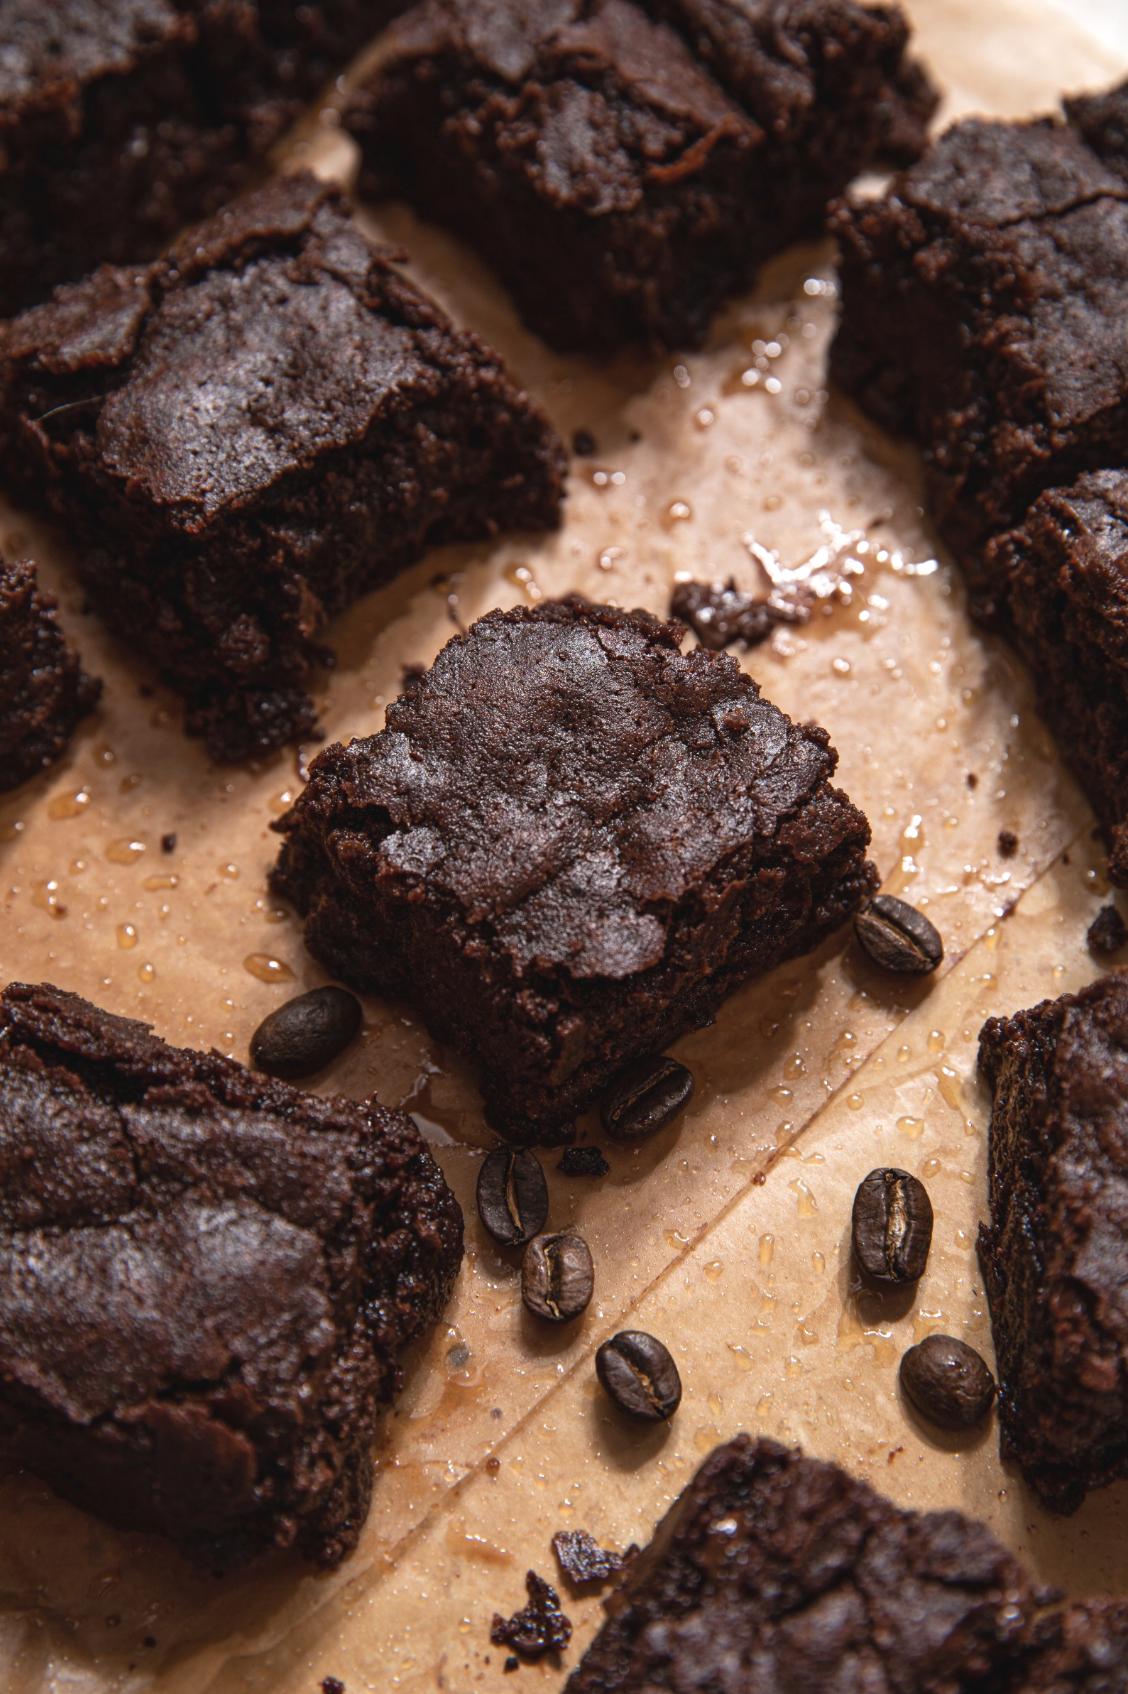  Rich and delicious, these brownies are sure to satisfy your cravings.